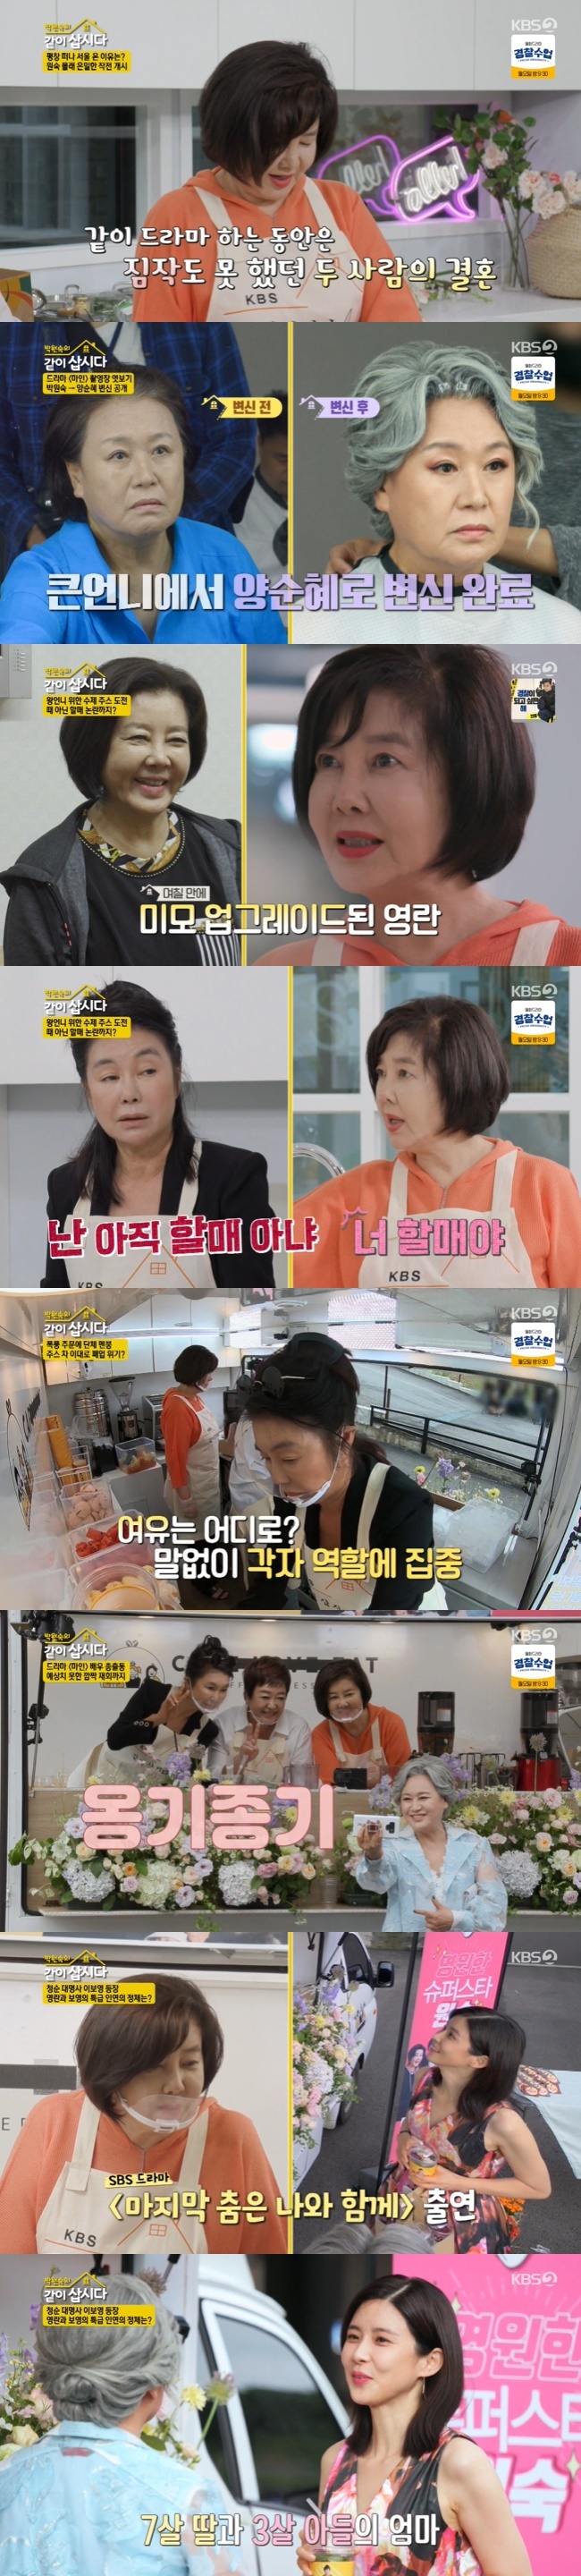 Hye Eun Yi, Kim Yeong-Ran and Kim Chung have prepared a special event for their eldest sister Park Won-sook.On KBS 2TV Lets Live With Park Won-sook Season 3, which was broadcast on August 11, the images of the younger brothers who cheered for the juice car directly on the shooting site of Drama of Park Won-sook were revealed.Earlier, Hye Eun Yi, Kim Yeong-Ran and Kim Chung promised coffee tea to increase the morale of Park Won-sook.Kim Yeong-Ran, who decided to prepare health juice instead of coffee, groomed the fruit himself with Hye Eun Yi.Kim Yeong-Ran said, I have a relationship with Mr. Jung Dong-hwan.Ji Sung and Lee Bo-young had a drama called Last Dance with Me before marriage.I did not know at all while I was doing Drama, he recalled, I could have noticed a little, but I did not know at all. Kim Yeong-Ran and Hye Eun Yi prepared rice cake with ACL juice, watermelon juice and grapefruit orange juice with Kim Chung, who joined late, and Hye Eun Yi airlifted to raspberries directly to the mountain.Kim Yeong-Ran was worried that we are the oldest when we go there, and we are the oldest wherever we go. Kim Chung said, Some people see us and say we are the old men.I am not yet a part of it, Kim Yeong-Ran refuted, I am over 60 years old. But Kim Chung said, In these days, 60 is still a girl, and my sisters have children, but I have no children. I should be 80 years old now.The three people who arrived at the set started making drinks in earnest, and the rushing spells were confusing. Kim Yeong-Ran said, It was too hard than I thought.I had three juices, but I came in 15 cups together, so I got a menbung. Park Won-sook, who had seen his younger brothers on the set, said, I was so grateful to have brought my brothers a tough nutrition juice car.I didnt expect it at all, but I shrugged.Park Won-sook, who had a moments break with his younger brothers, called Lee Bo-young, who was passing by.Kim Chung admired the beauty of Lee Bo-young, who said, I have not changed one thing. Kim Yeong-Ran said, Do you remember working with me?Do you remember getting choked up by the director in the middle? Kim Yeong-Ran said, I have two children, and Im a little bit more than a little girl.I am 7 and 3 years old. Park Won-sook praised Kim Yeong-Rans beauty, which was watered by diet, at the end of Kim Yeong-Ran, The best molding is diet.Kim Chung said, I am very depressed in the central region, but now I have to wear Panti as a lady.Park Won-sook also introduced Kim Seo-hyung, who appeared in Mine.Kim Chung, who had appeared in the past Paris Lovers starring Kim Seo-hyung, revealed the story of the luggage being stolen at the Paris Hotel at the time.Kim Seo-hyung said, There was a hotel outside at the time, and I left my luggage in the lobby and I lost my teachers luggage. Kim Chung said, I asked for 20 million won.I asked them what they had, he recalled.Hye Eun Yi, Kim Yeong-Ran and Kim Chung, who finished the juice event safely, were tired enough to sit on the bottom of the juice car.I know theres nothing easy about the world, but it was hard that day, too.We were exhausted and all three of them were scattered in the coffee car as if we were sprawling in laundry, he said. I was feeling hard, but I had a very pleasant experience.